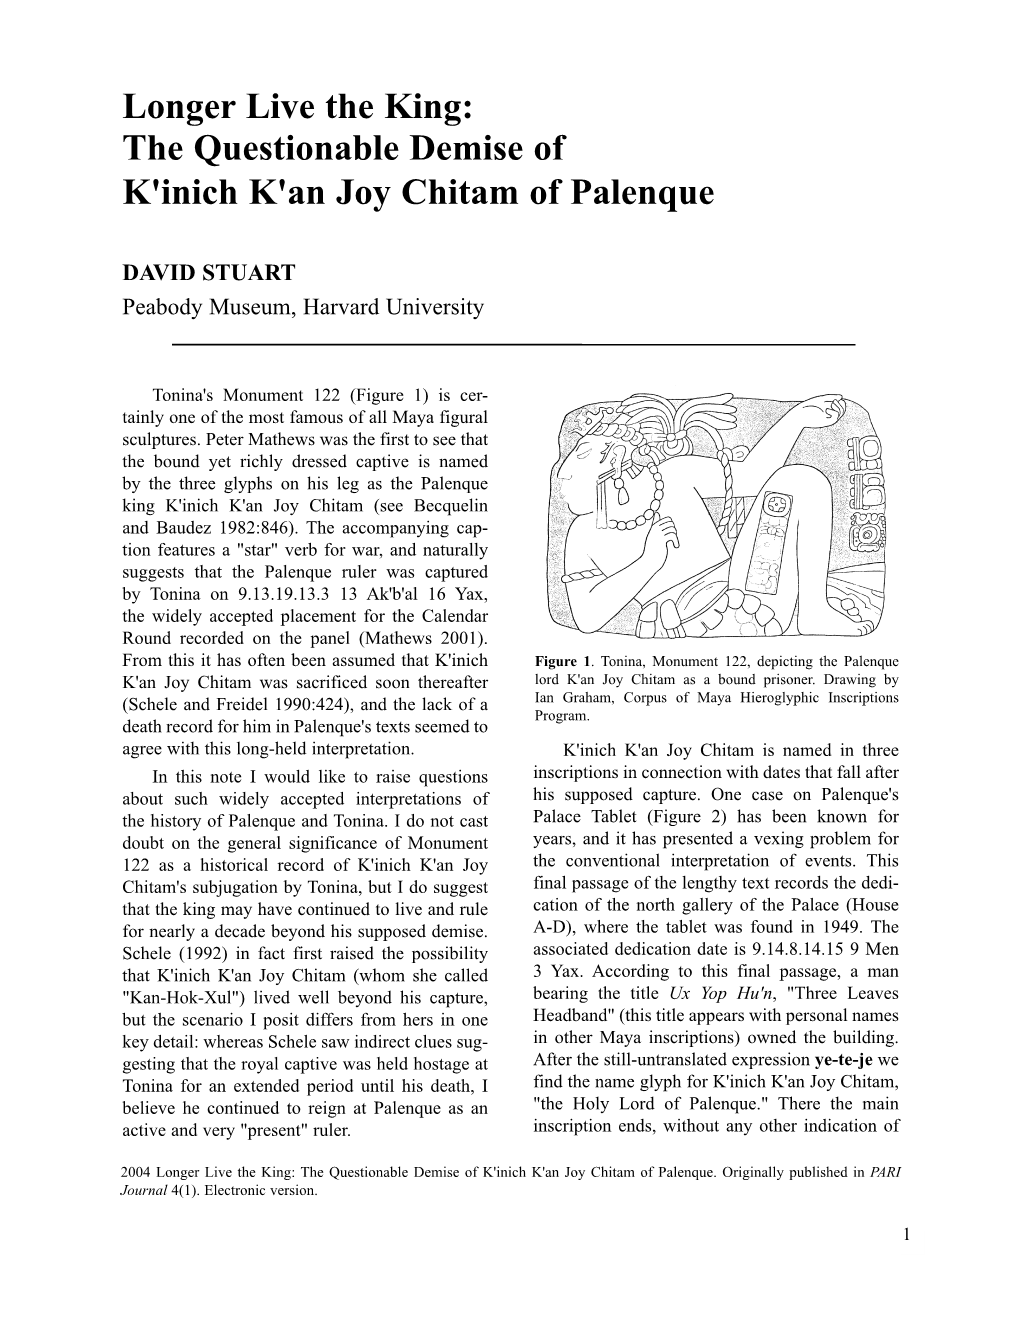 Longer Live the King: the Questionable Demise of K'inich K'an Joy Chitam of Palenque